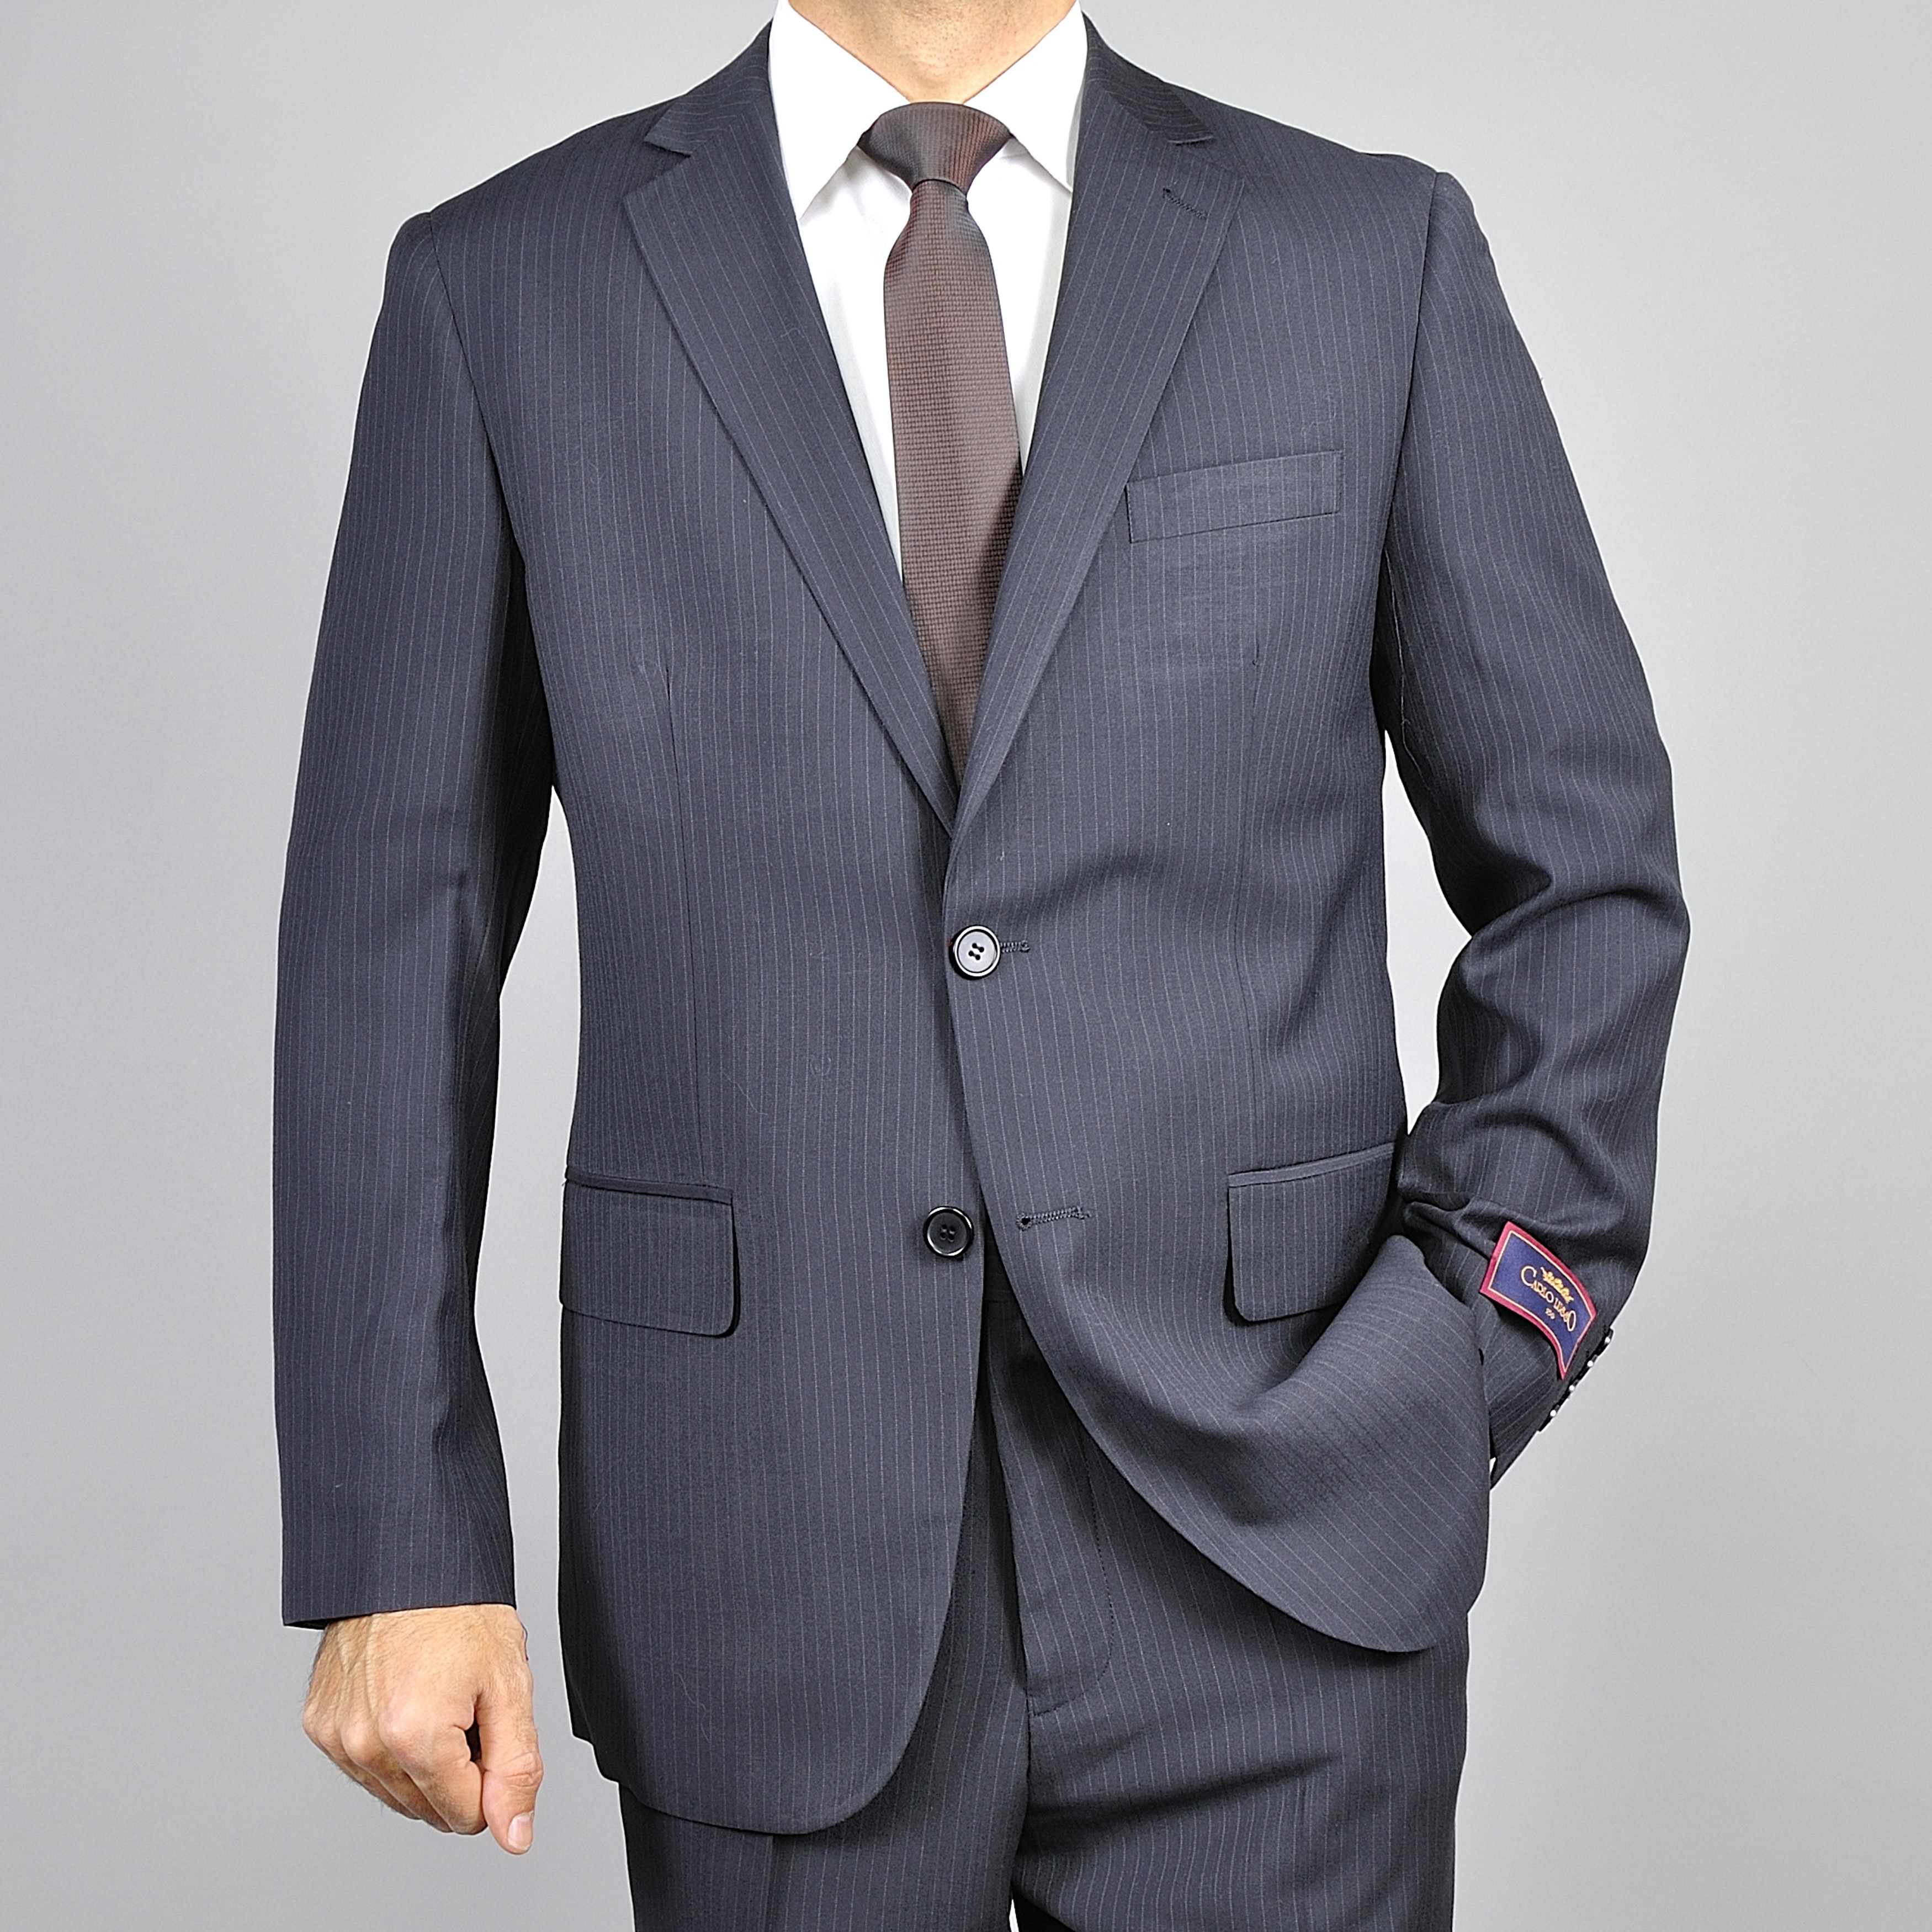 Men's Pinstripe Black 2-Button Suit - Free Shipping Today - Overstock ...